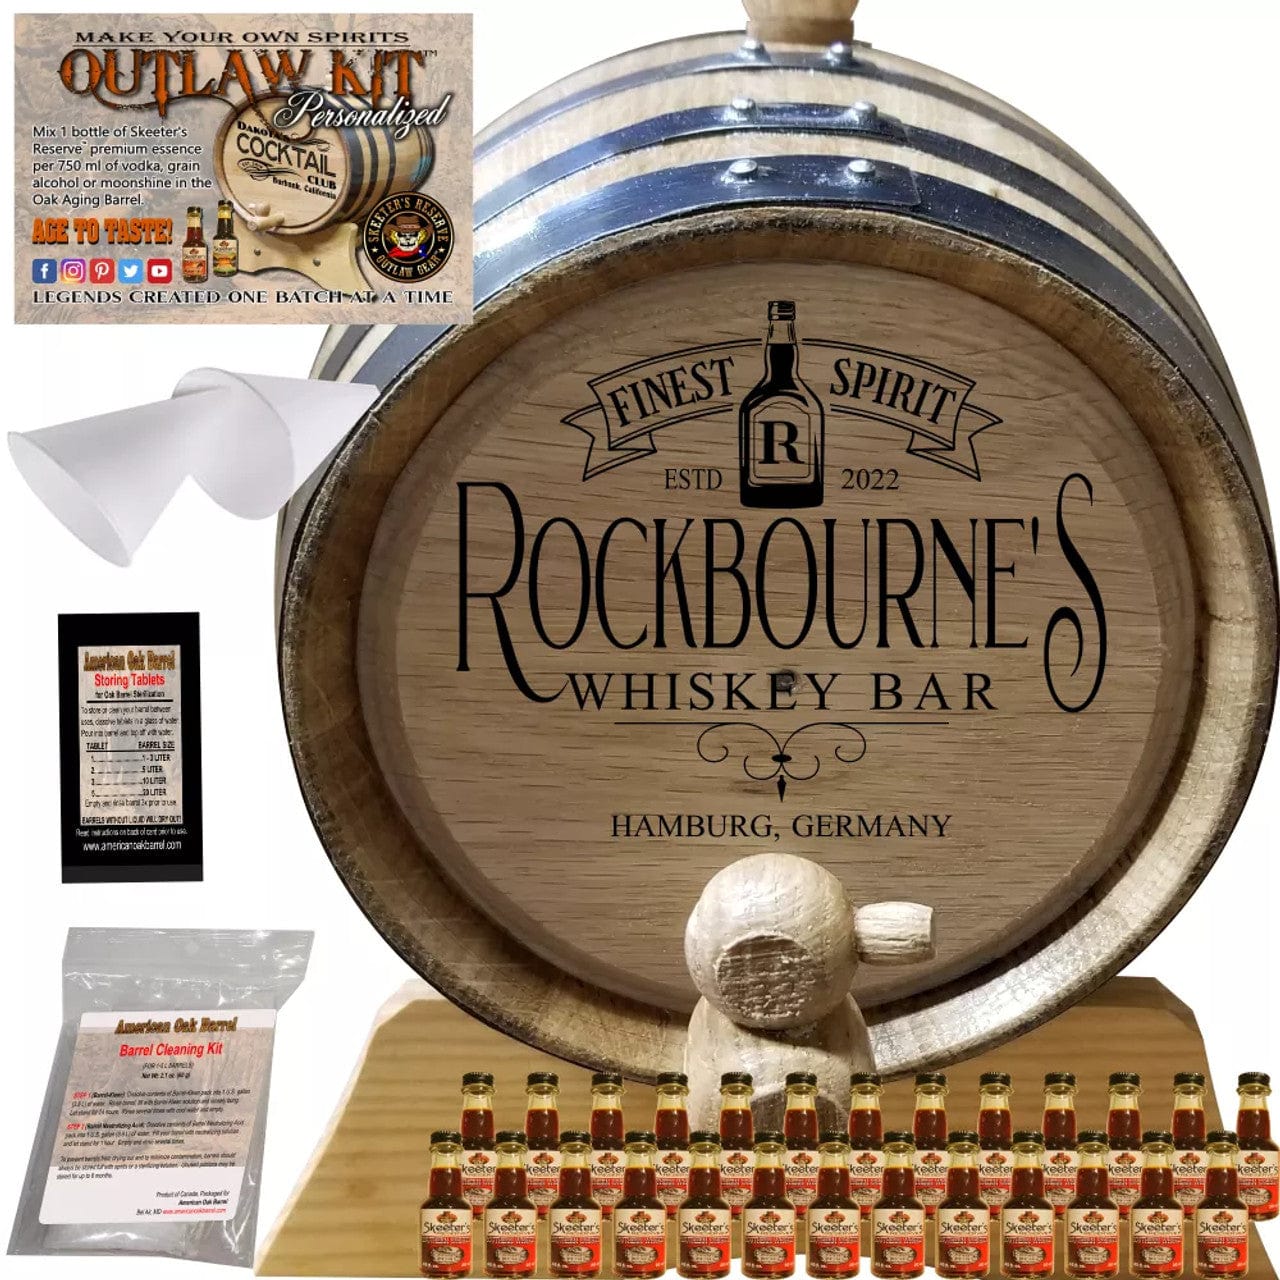 American Oak Barrel Engrave Barrels 1 Liter (.26 gallon) / Southern Whiskey / None American Oak Barrel Personalized Outlaw Kit™ (213) My Whiskey Bar - Create Your Own Spirits in Southern Whiskey